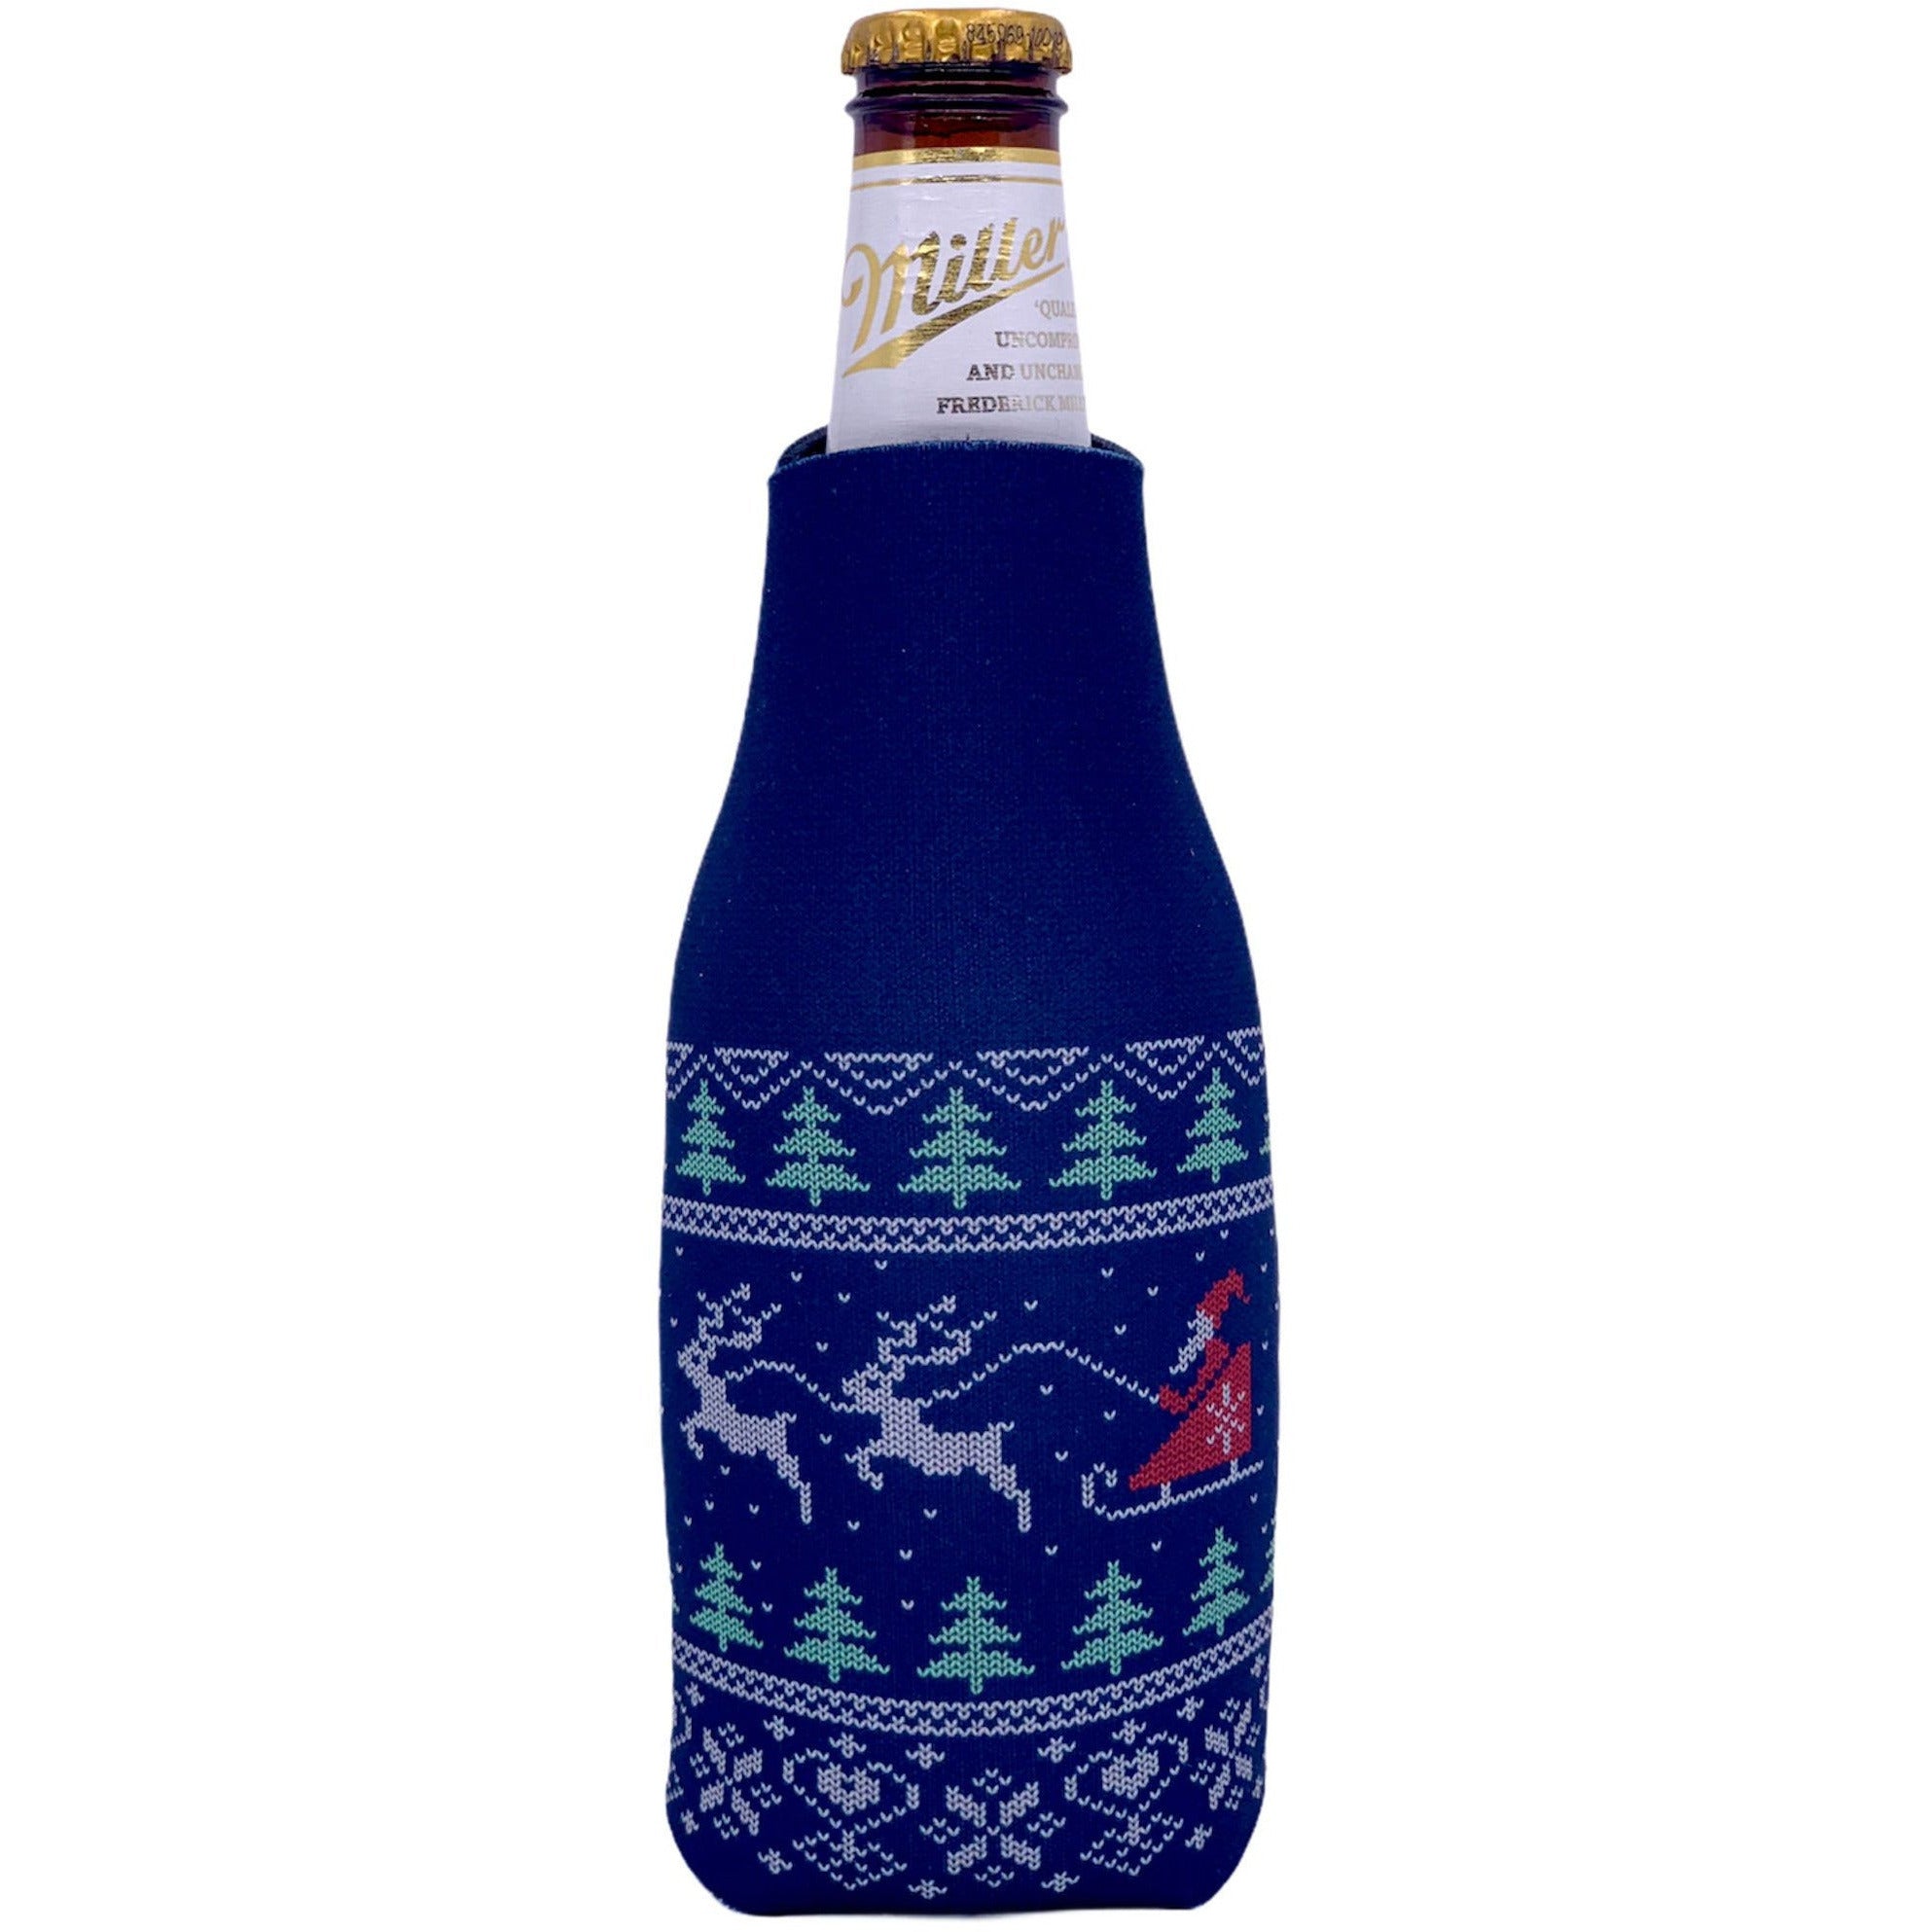 Reindeer and Beers Christmas Pattern 16 oz. Can Coolie